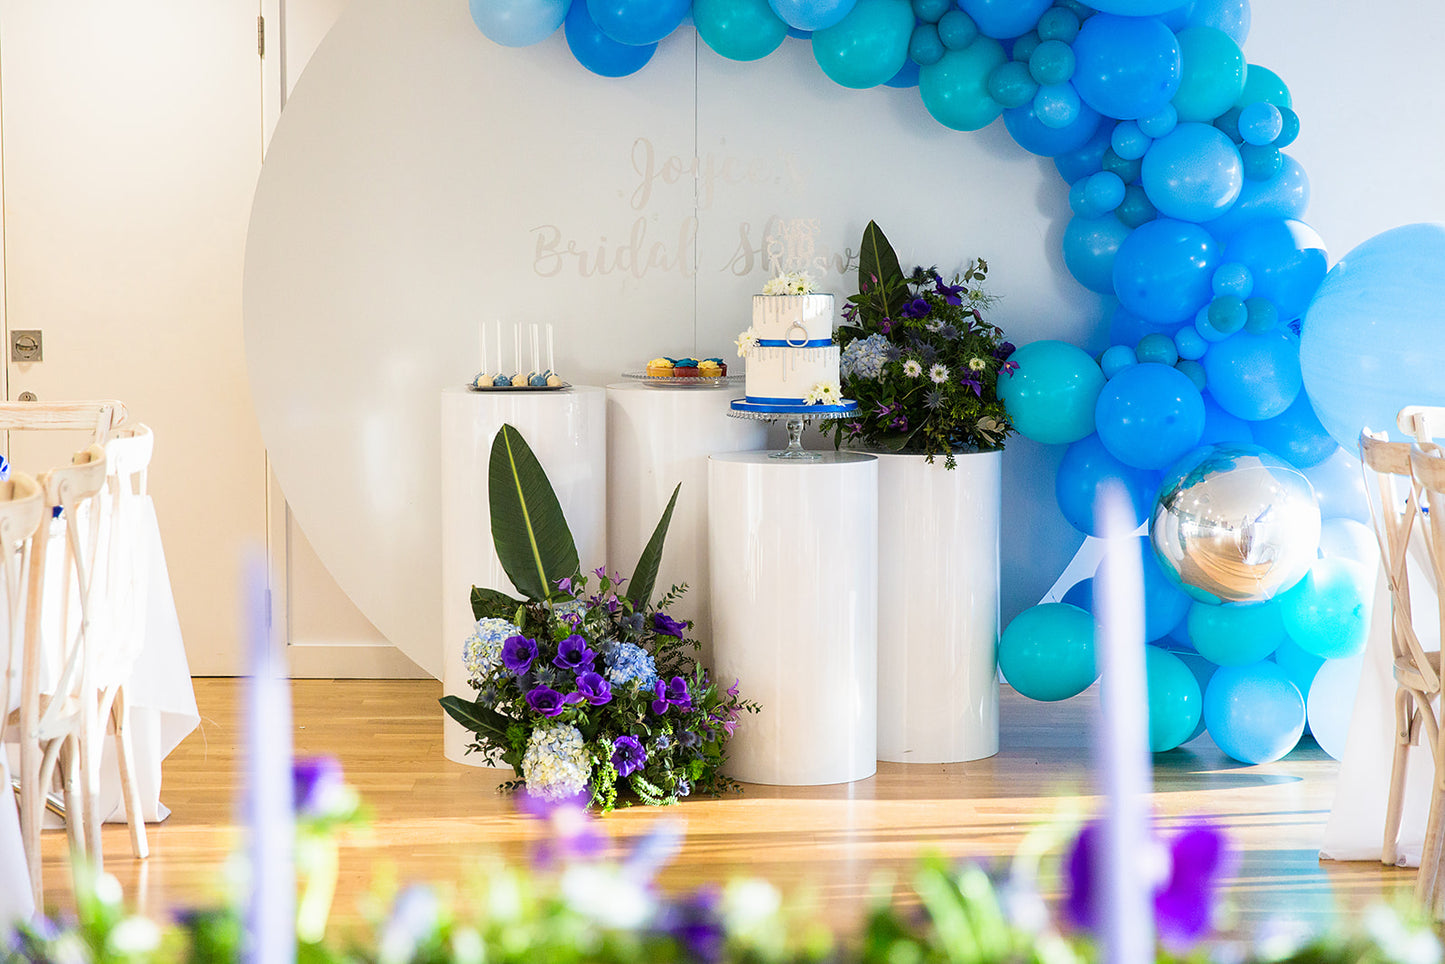 Round backdrop with balloons, plinth and sign